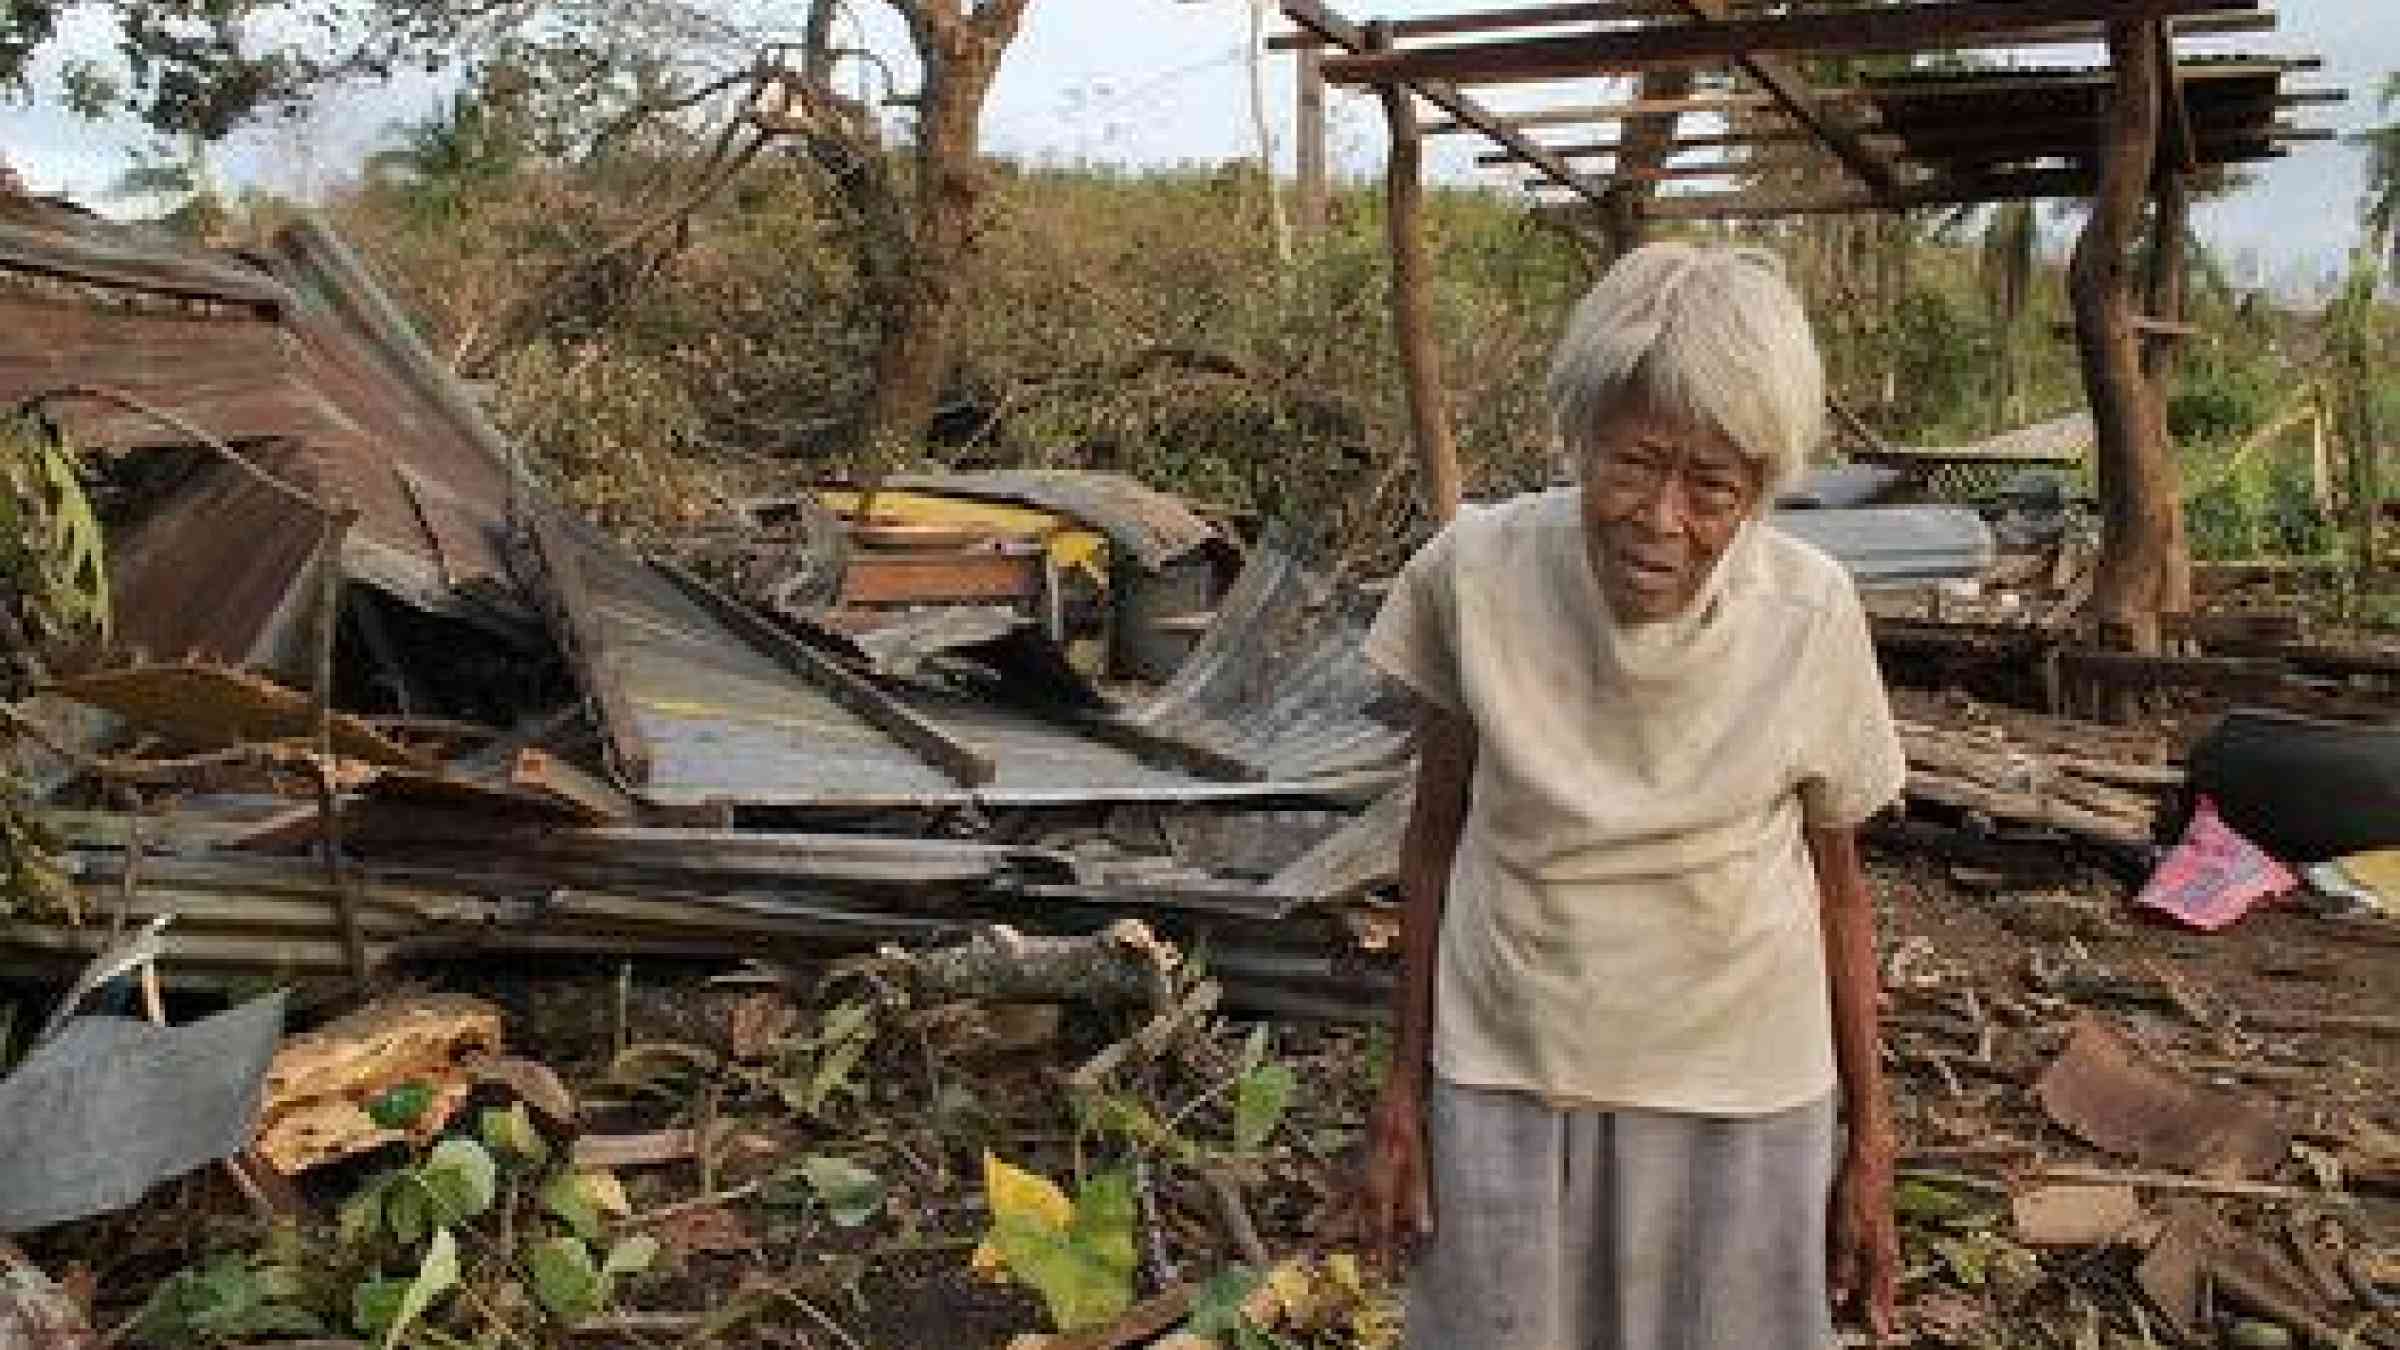 Eighty-one-year-old Nemesia Tipait was buried under the rubble of her house before being rescued by neighbours in Kayang local district, Bogo City, after Typhoon Haiyan. The Philippines has unveiled a 2014 national budget that recognises the need to reduce disaster risk at the local level.